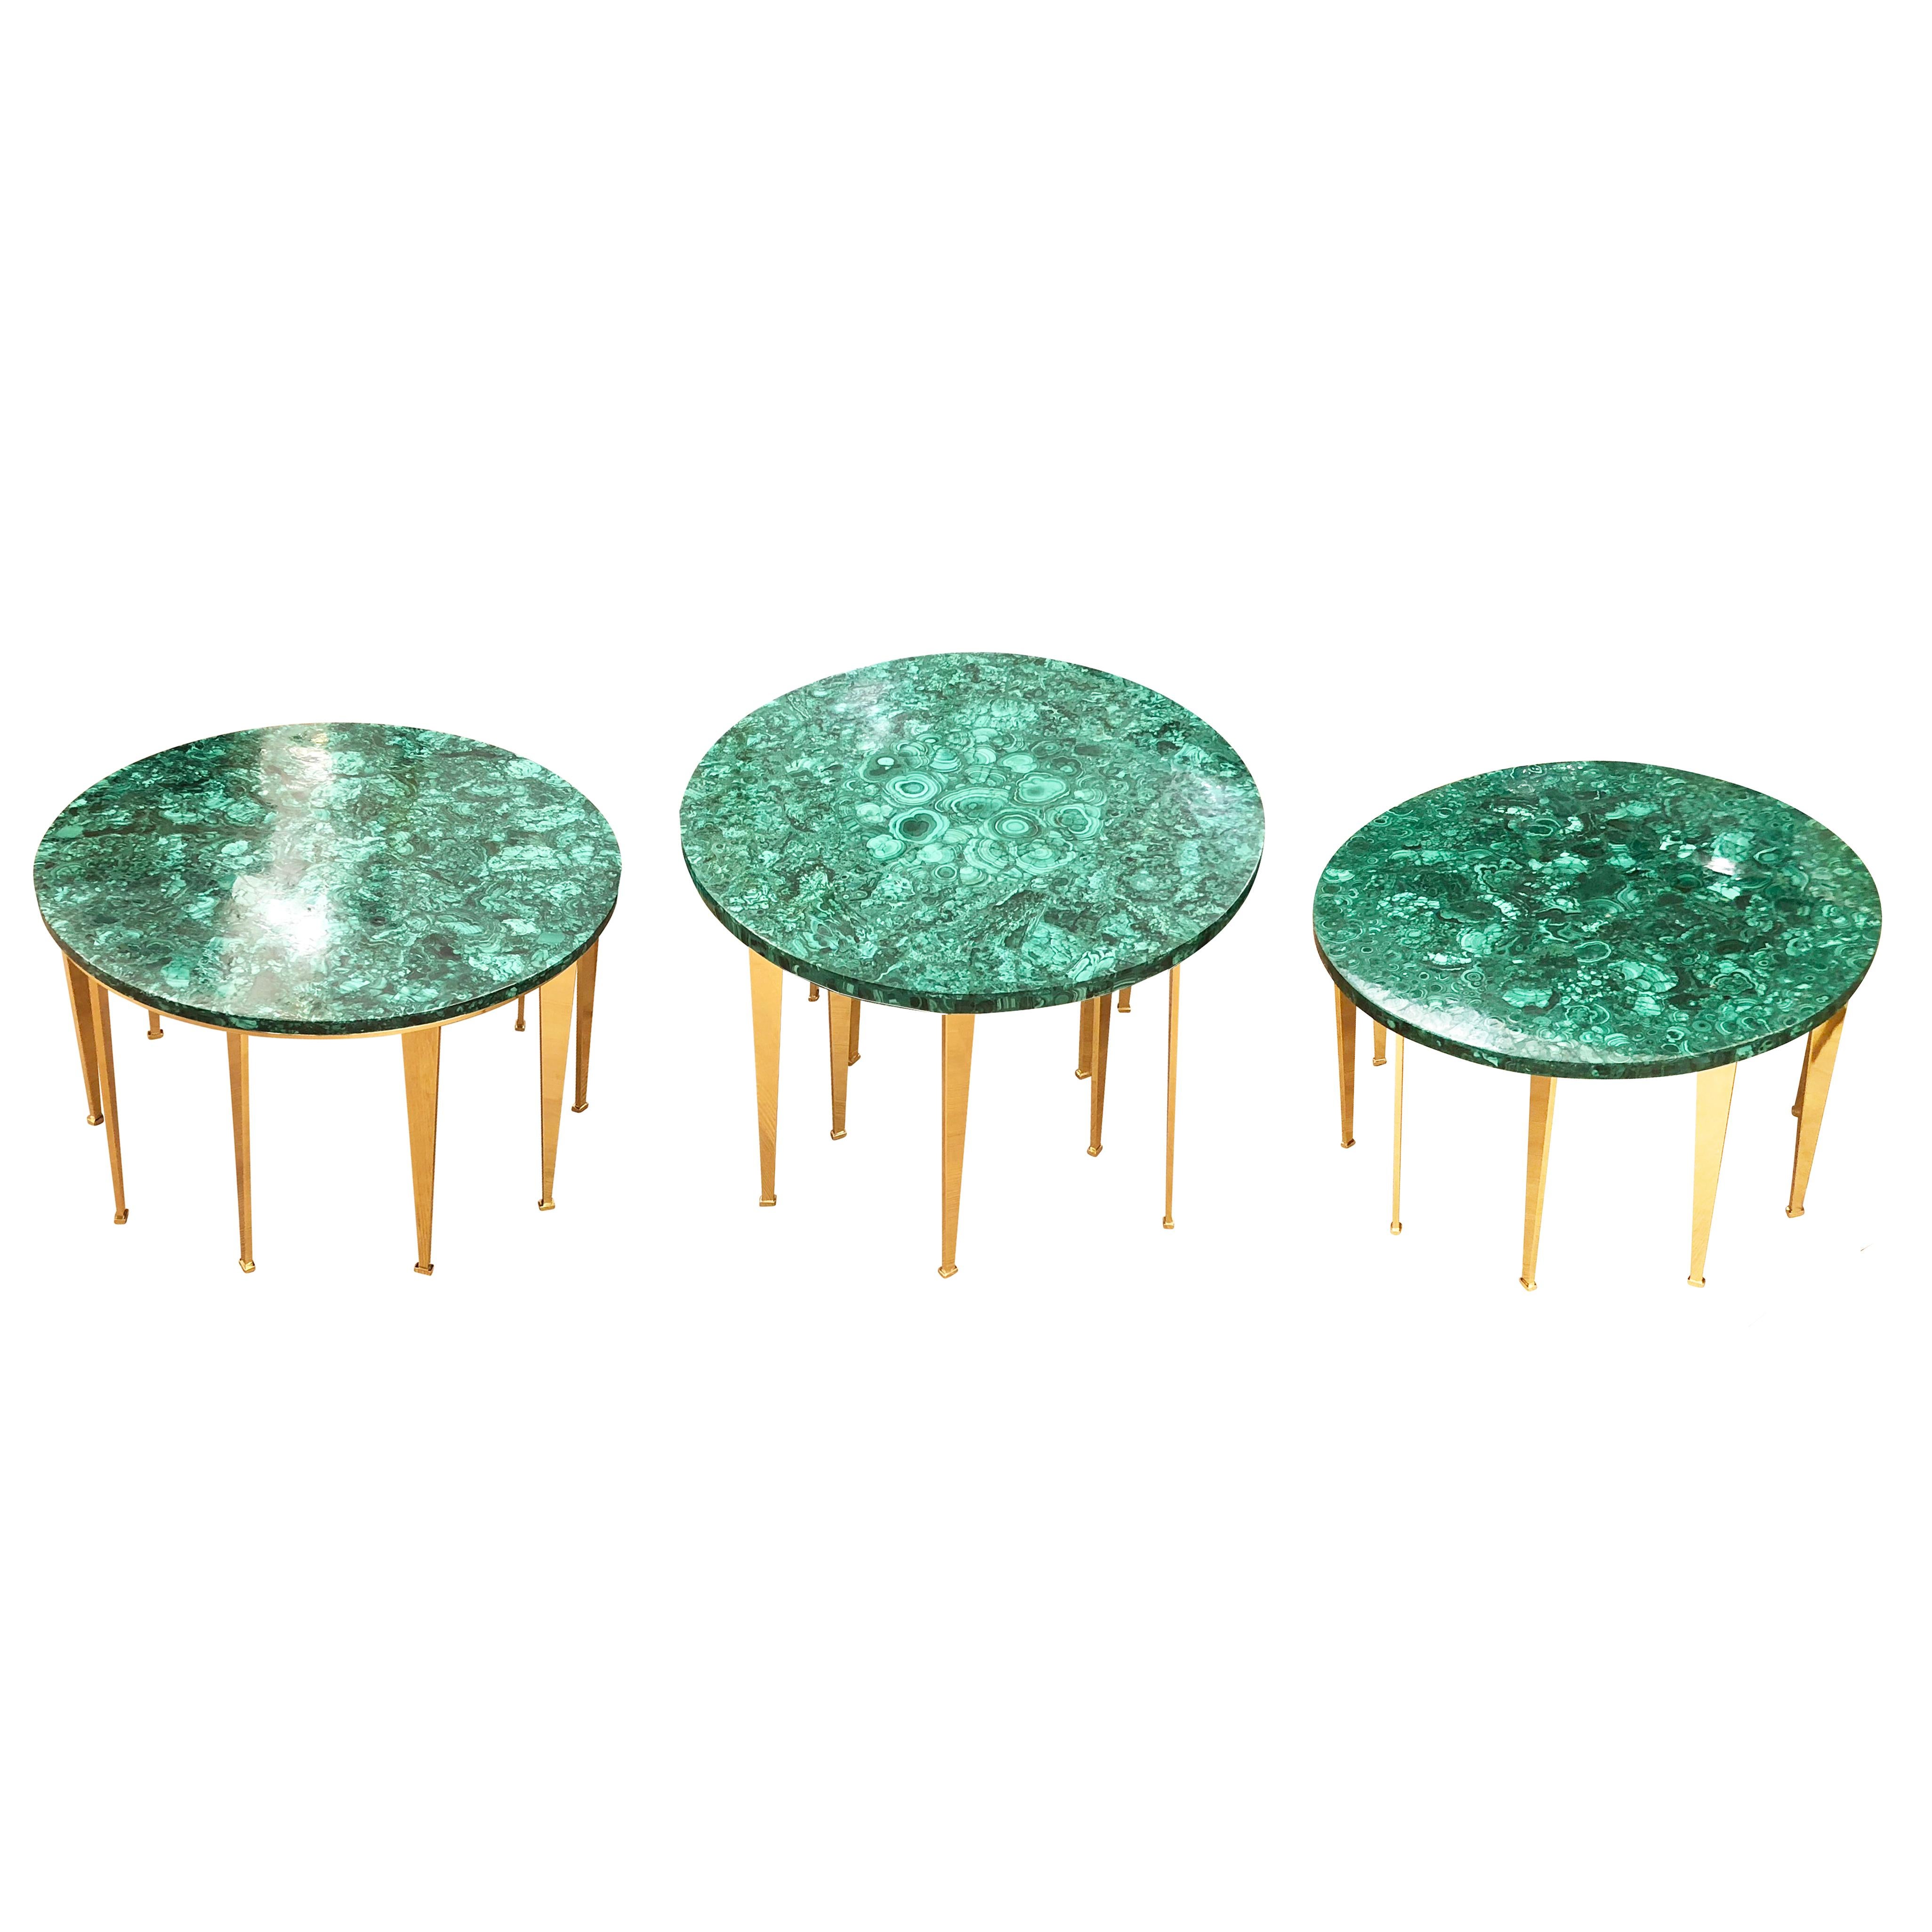 Versatile set of limited edition tables that can be used together to form a coffee table or individually as side tables. Each has a malachite top and a brass base consisting of several tapering legs angled in different directions. The taller center